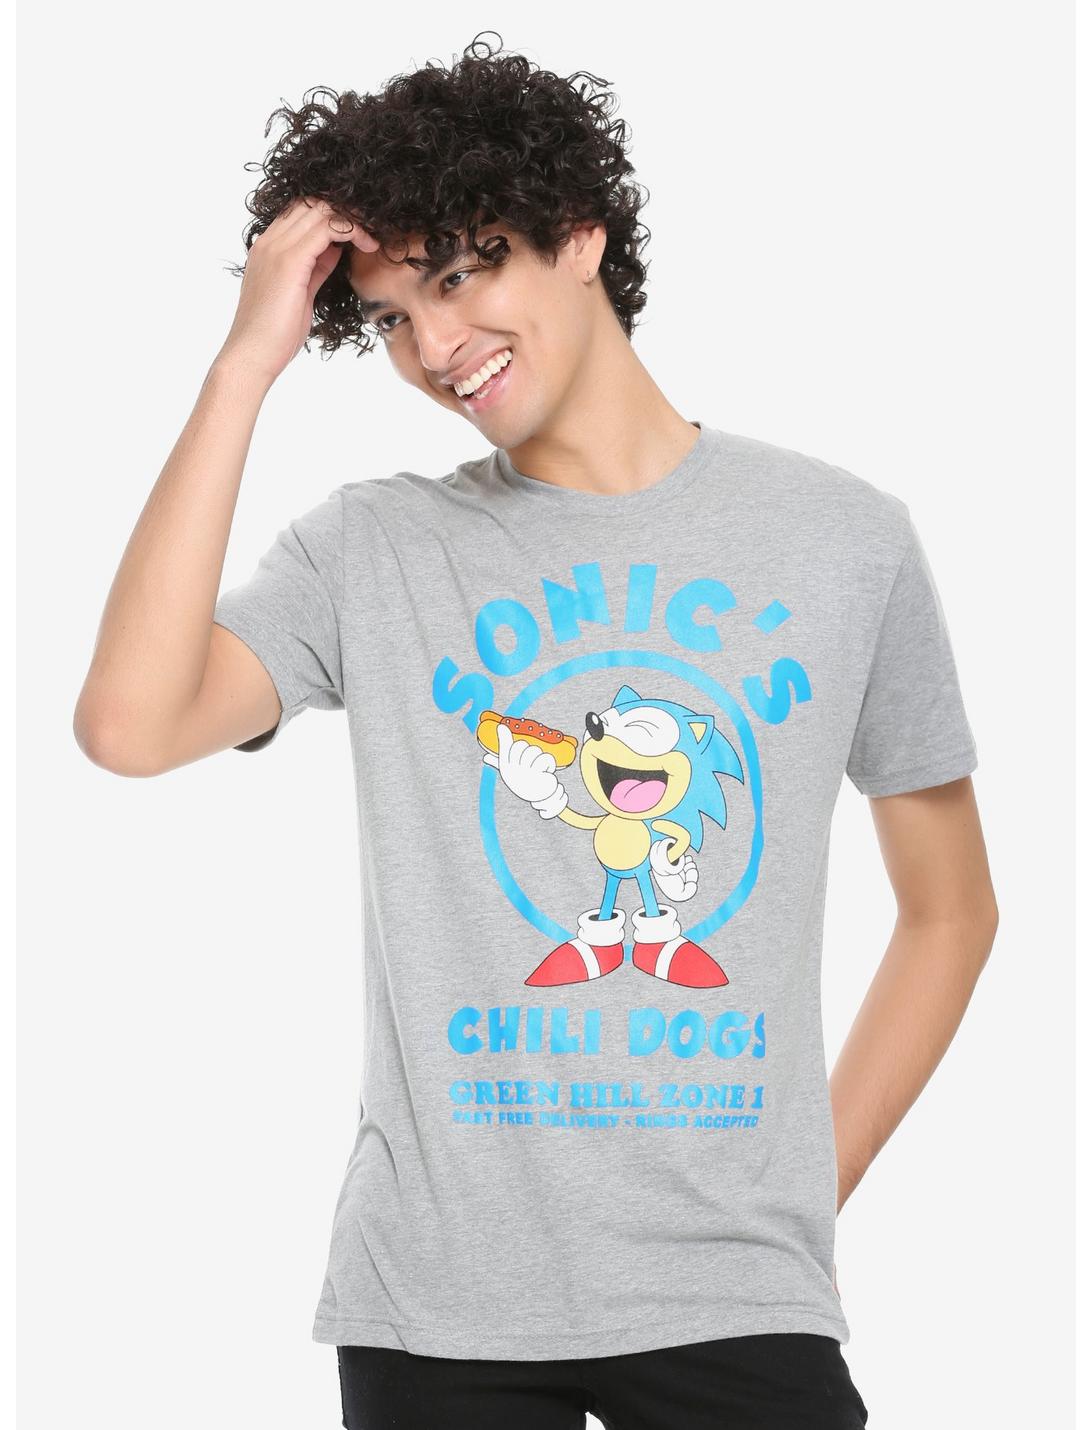 Sonic The Hedgehog Chili Dogs T-Shirt - BoxLunch Exclusive, GREY, hi-res